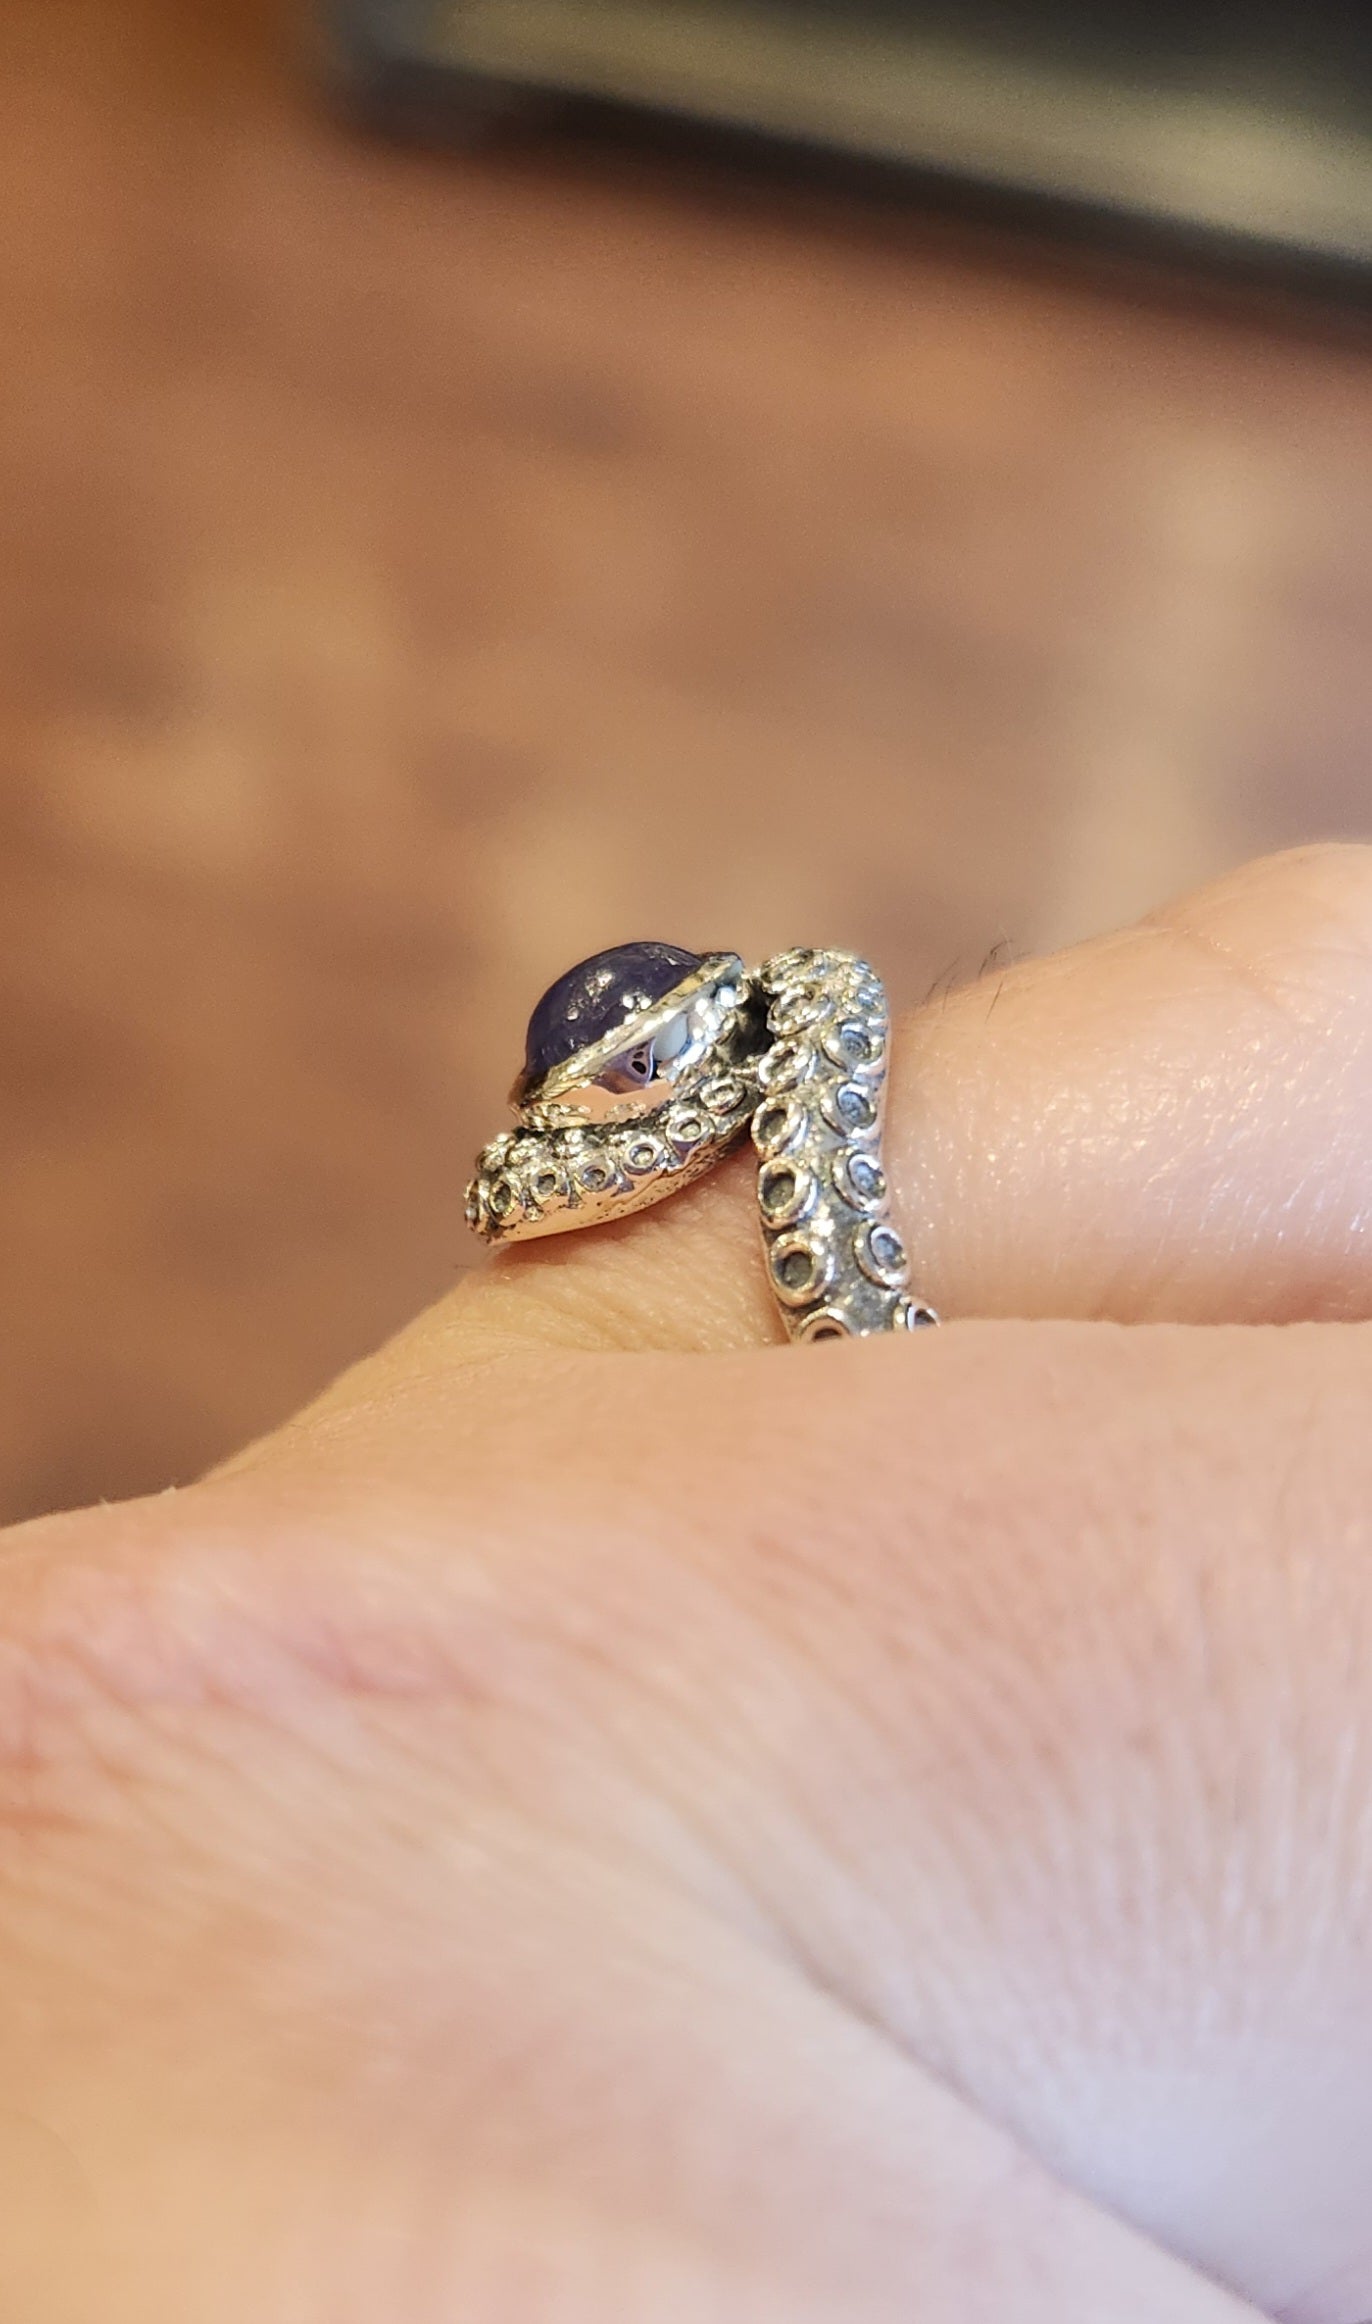 Sterling silver tentacle ring with tanzanite.